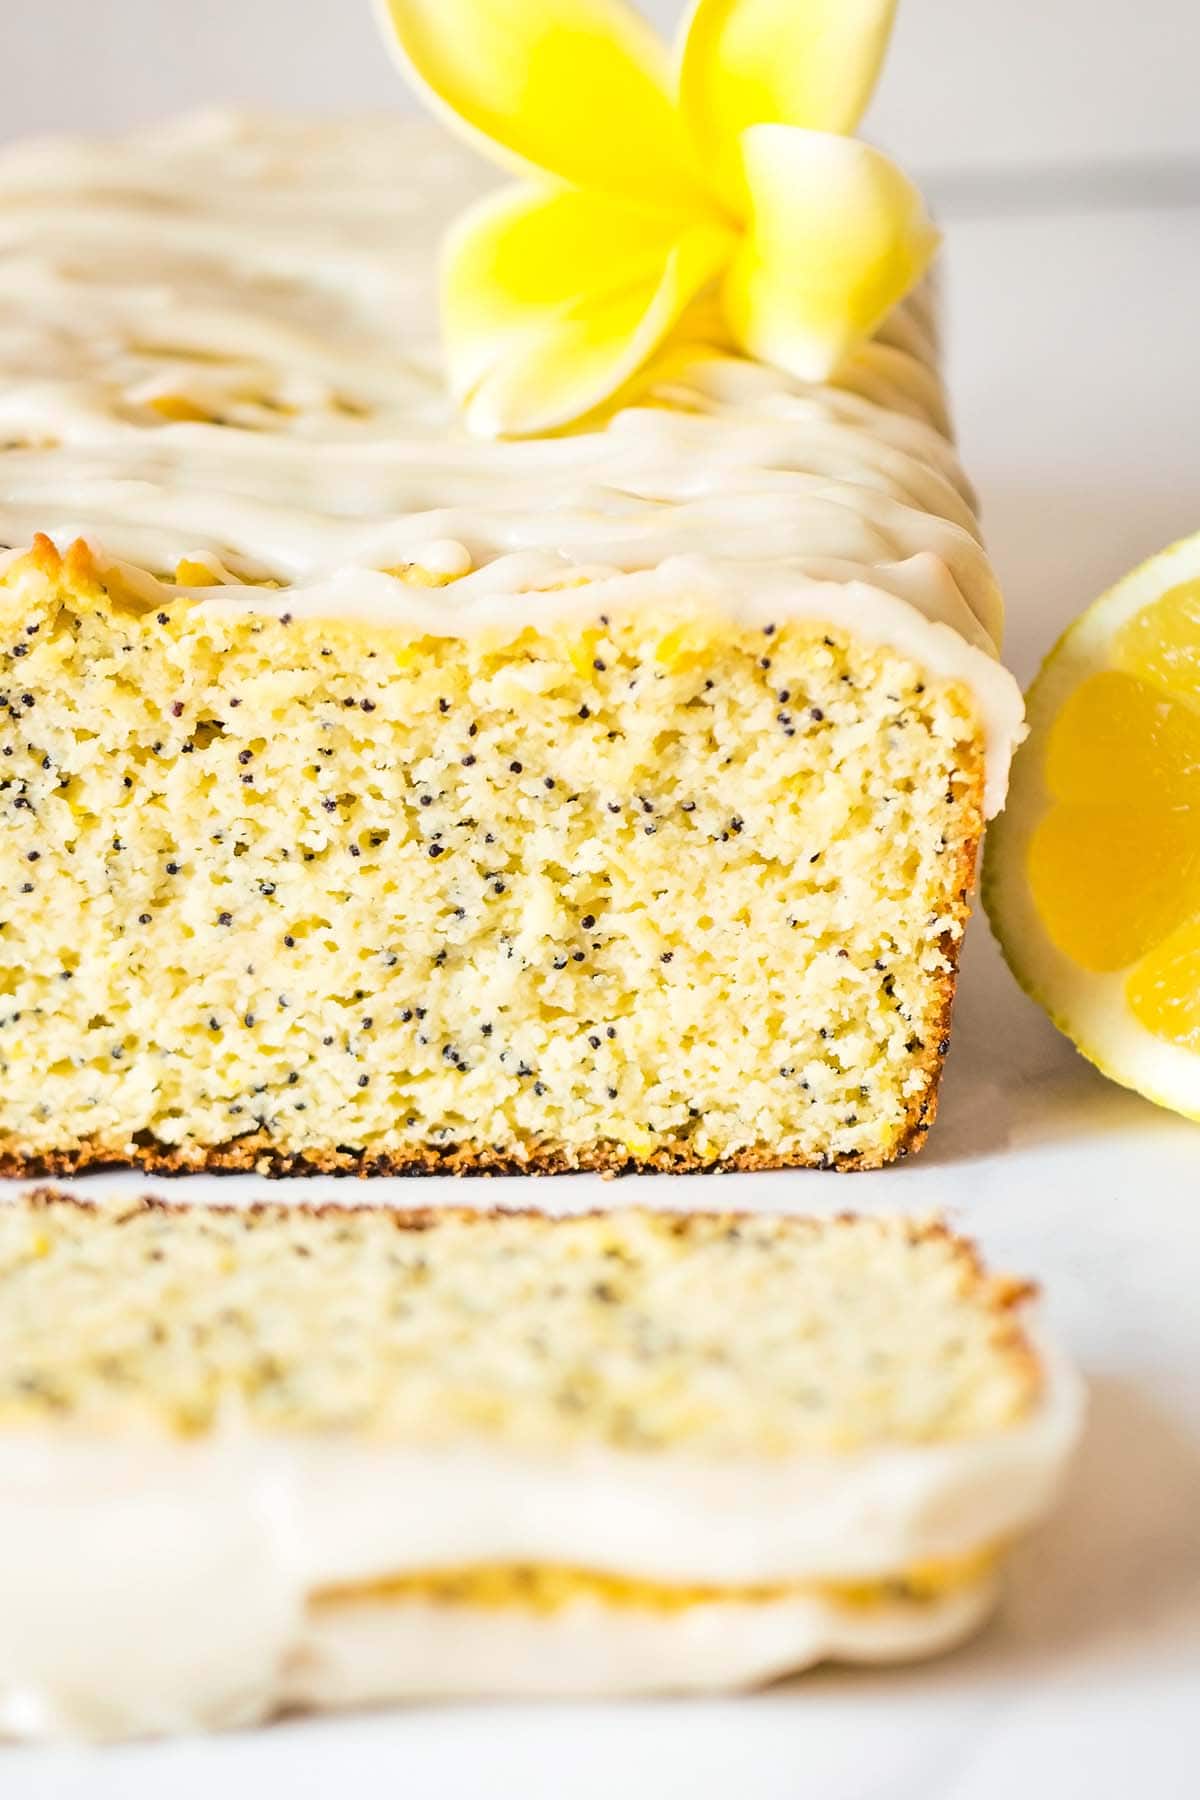 Keto lemon loaf close up view of inside crumb texture